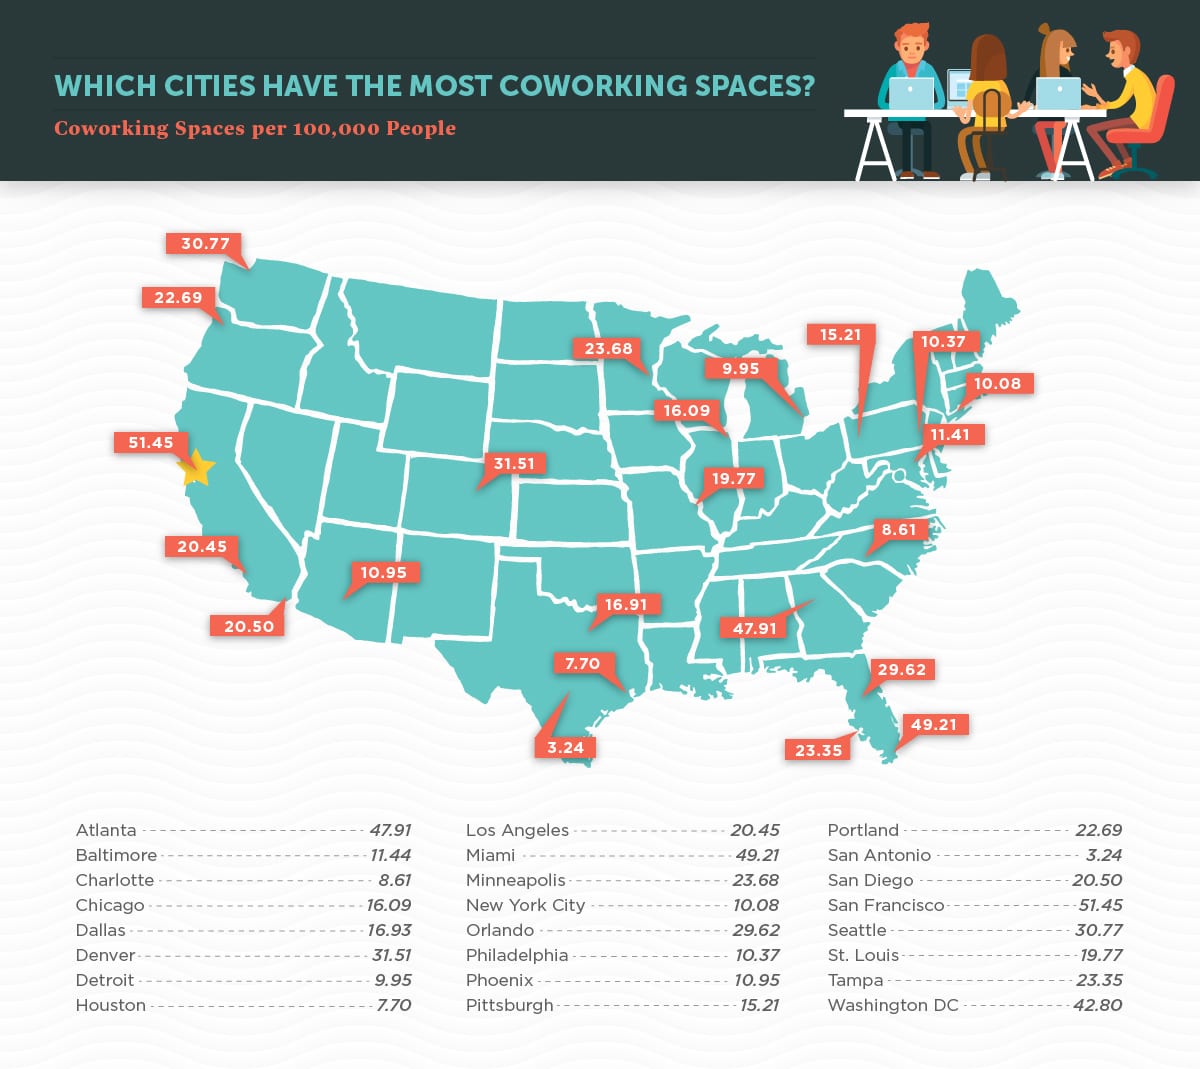 U.S. cities with the most coworking spaces.